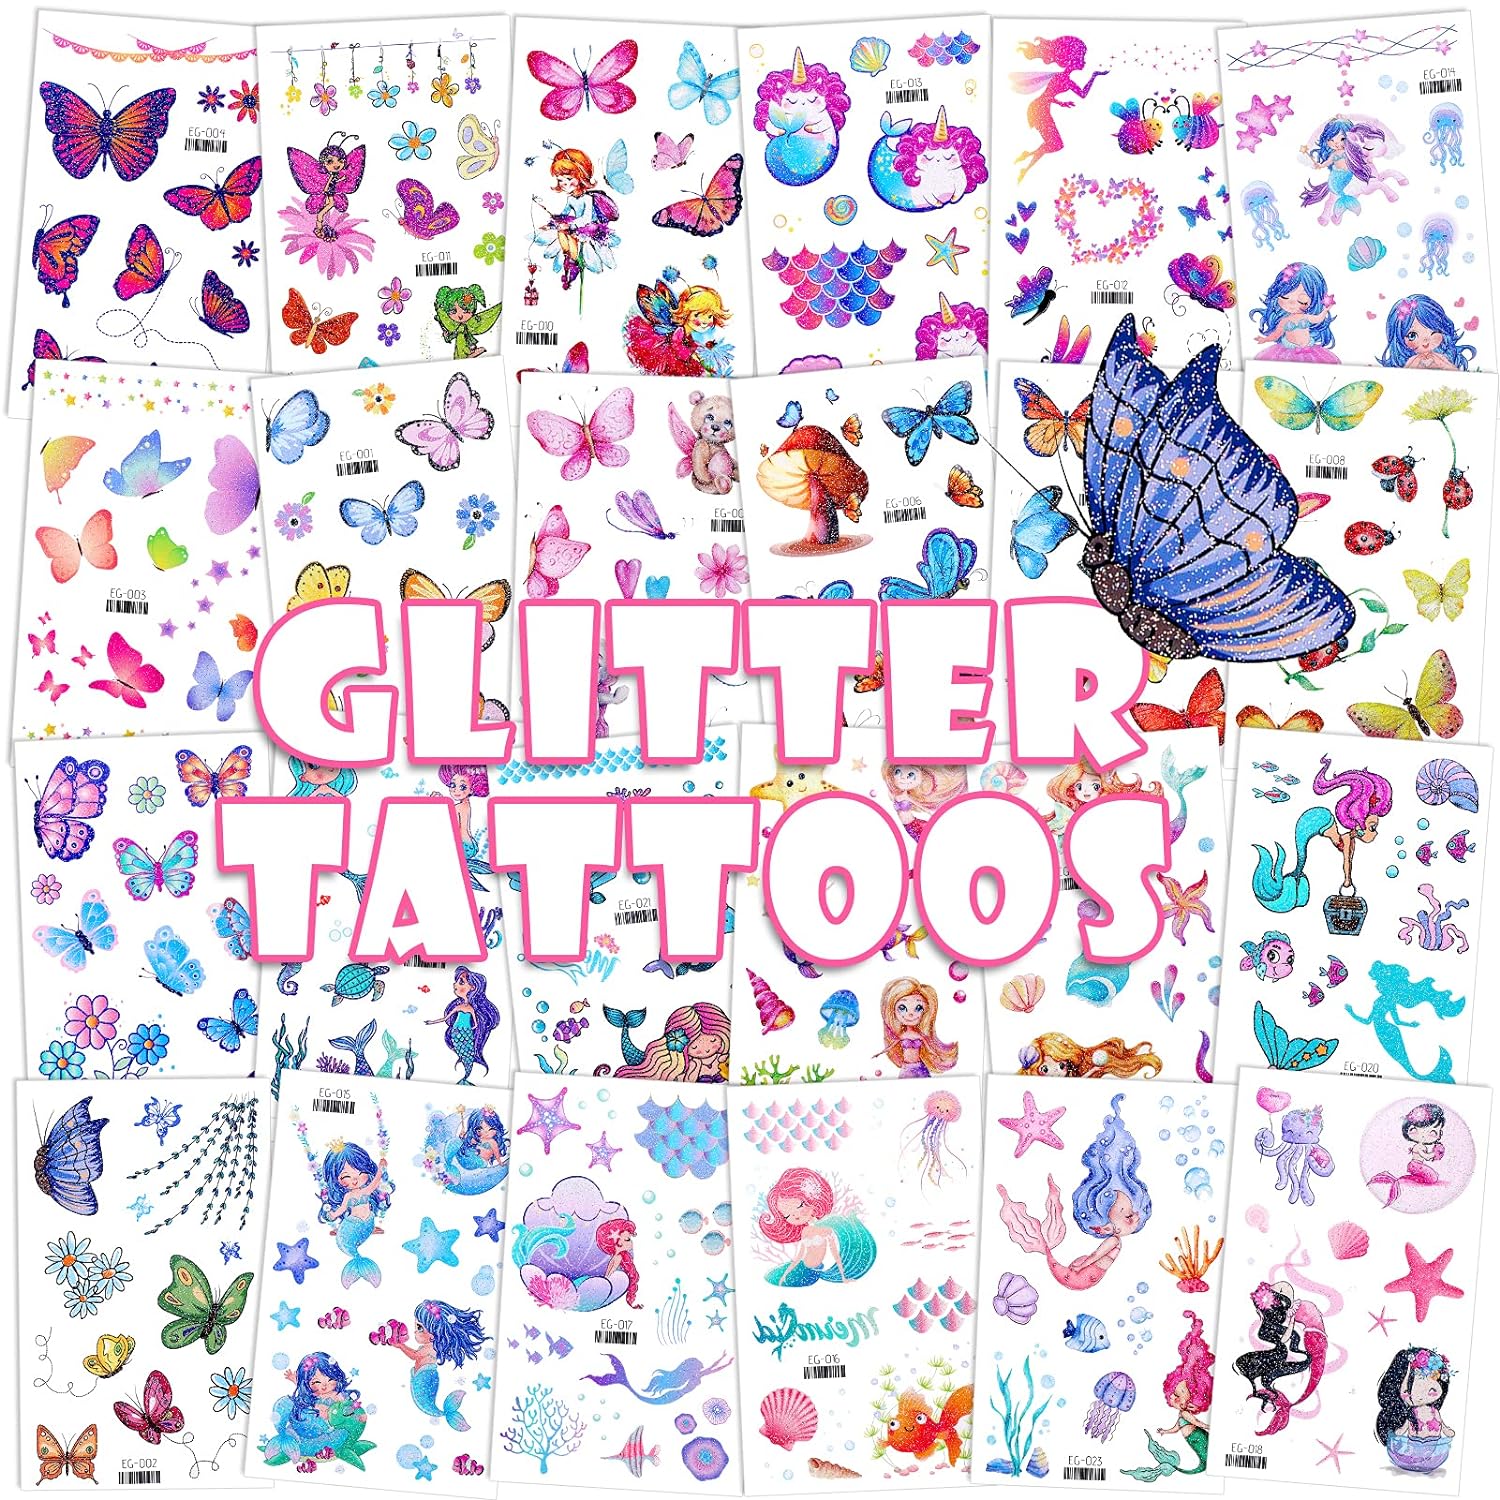 Konsait Glitter Temporary Tattoo for Girls, 24 Sheets Buttery Mermaid Fairy owers Tattoo Stickers for Kids, Waterproof Fake Tattoos for Birthday Party Favors Goodie Bags Stuffers Party Fillers